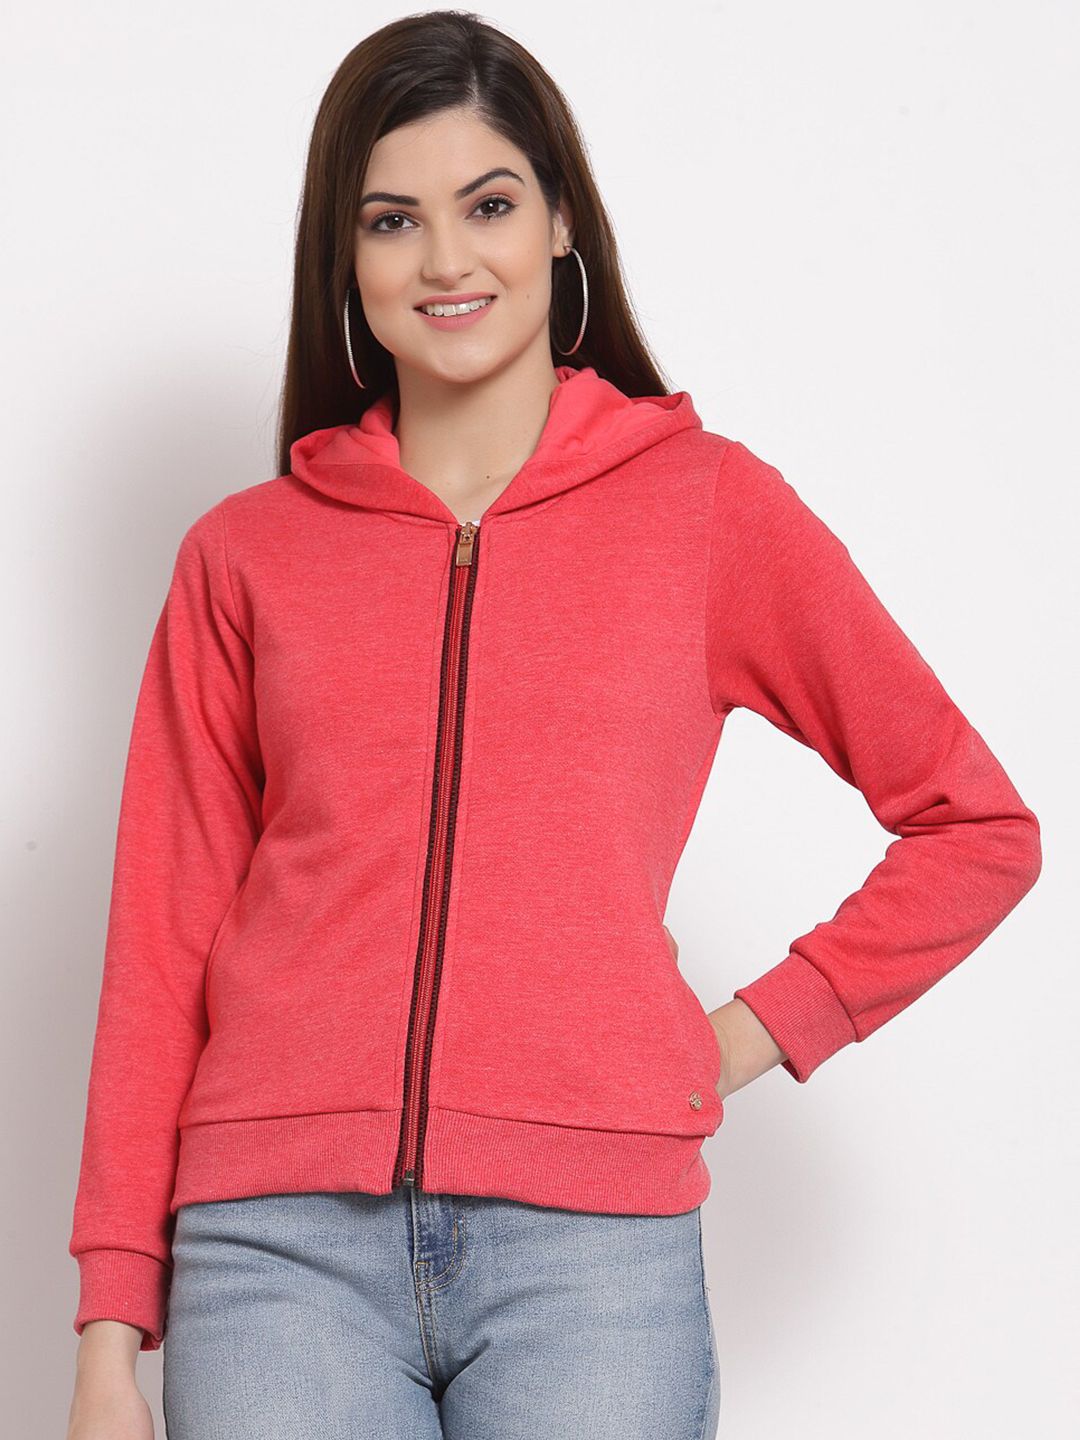 Juelle Women Red Solid Hooded Sweatshirt Price in India